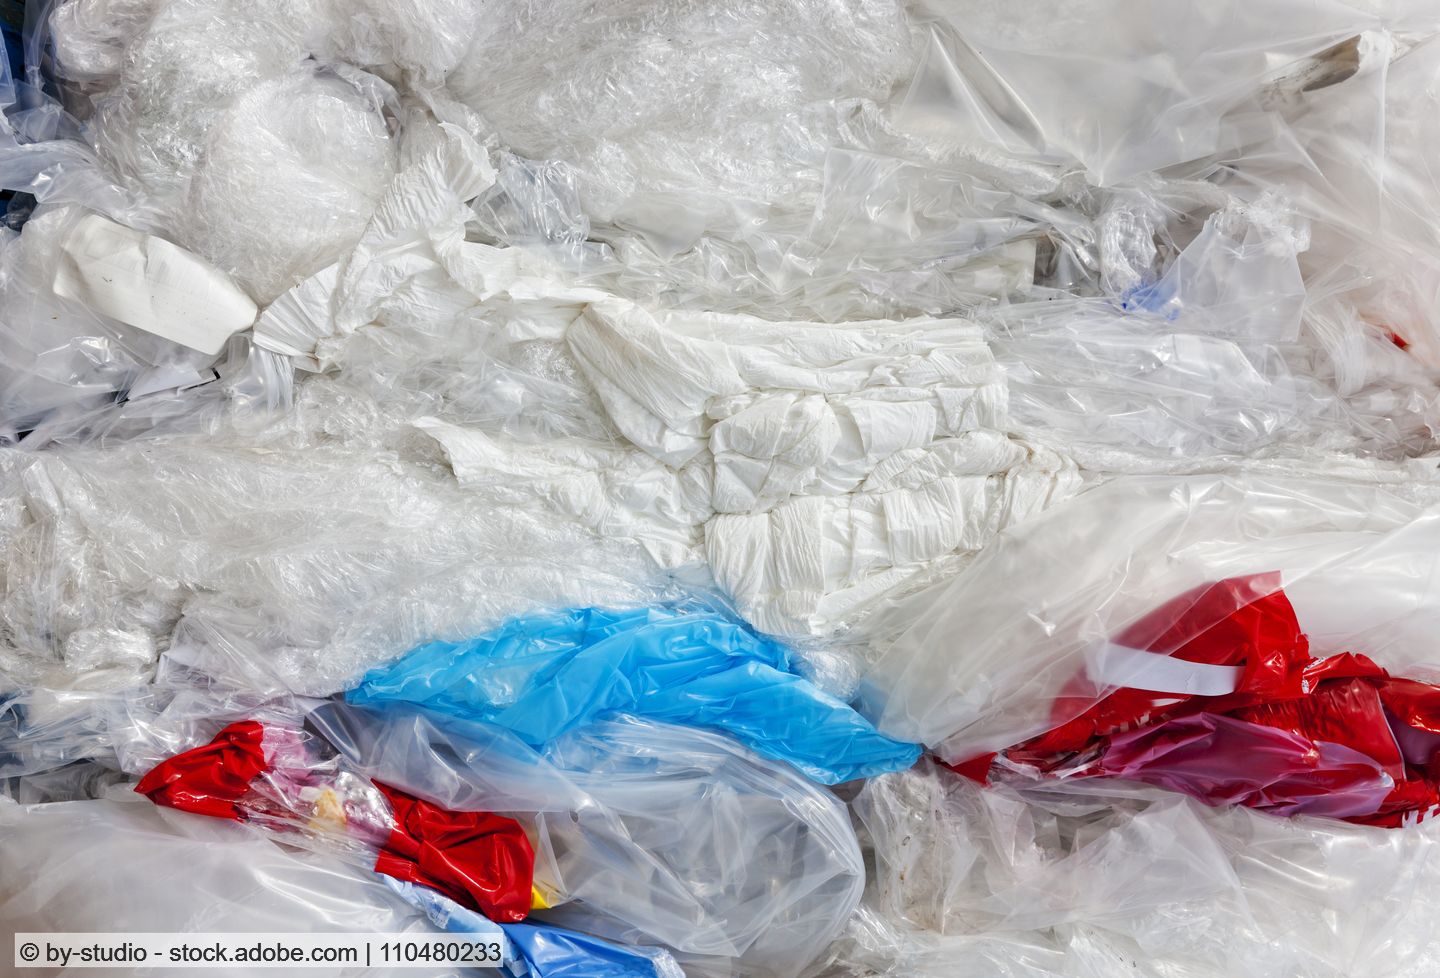 European plastic recycling in serious trouble amid Covid-19 shutdowns